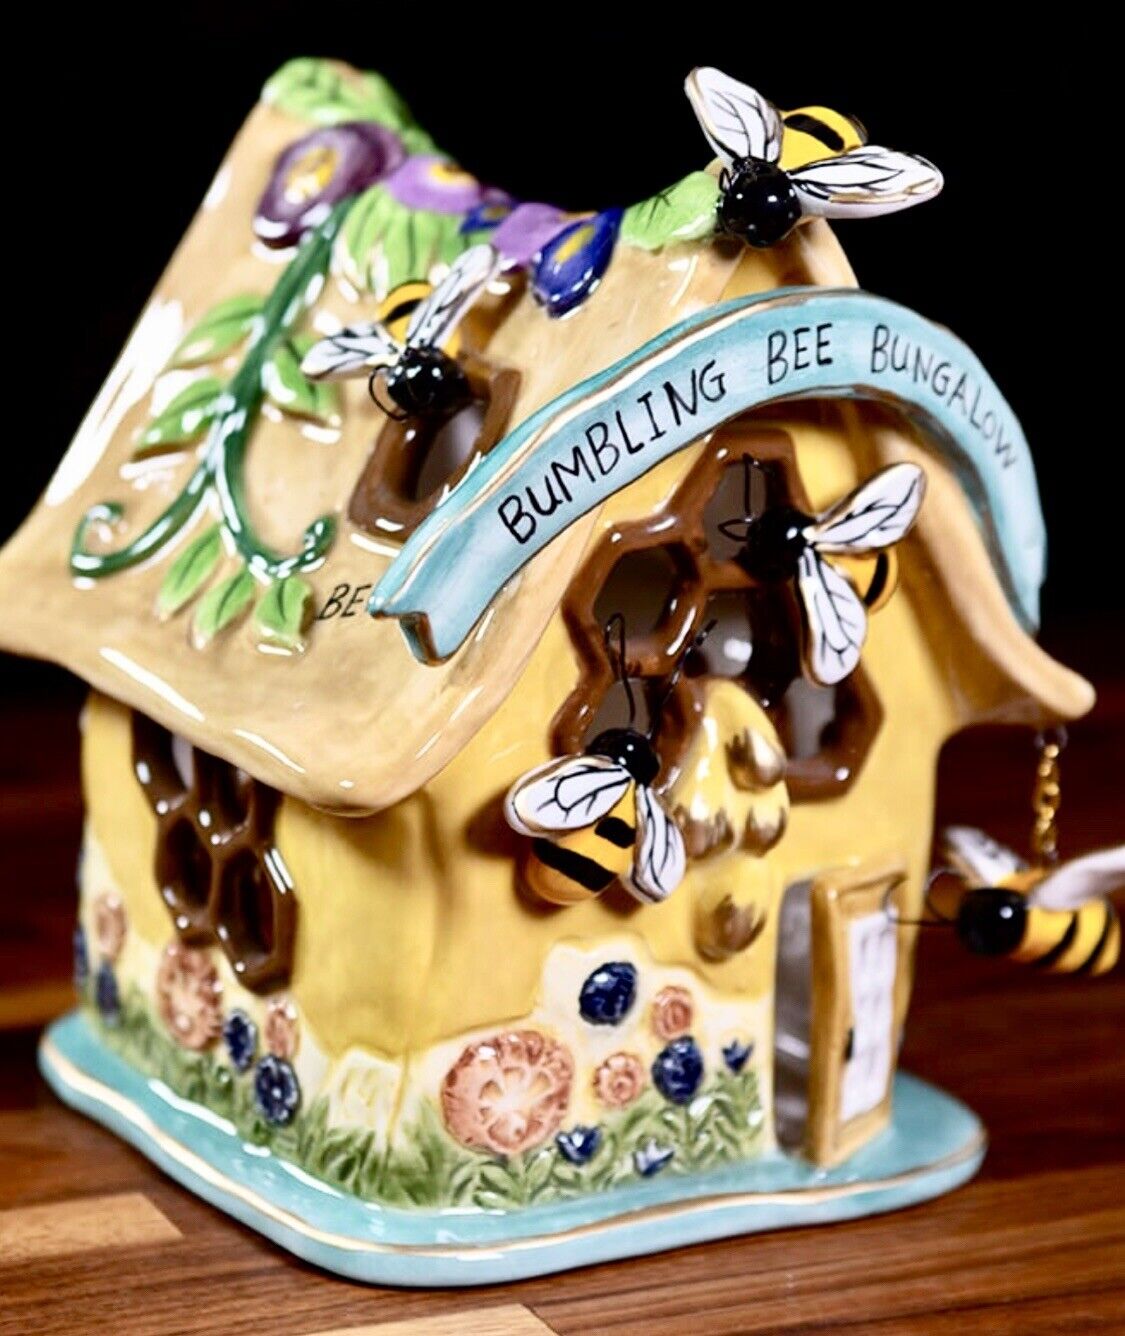 NEW RELEASE Blue Sky Bumbling Bee Bungalow Tealight House #20499